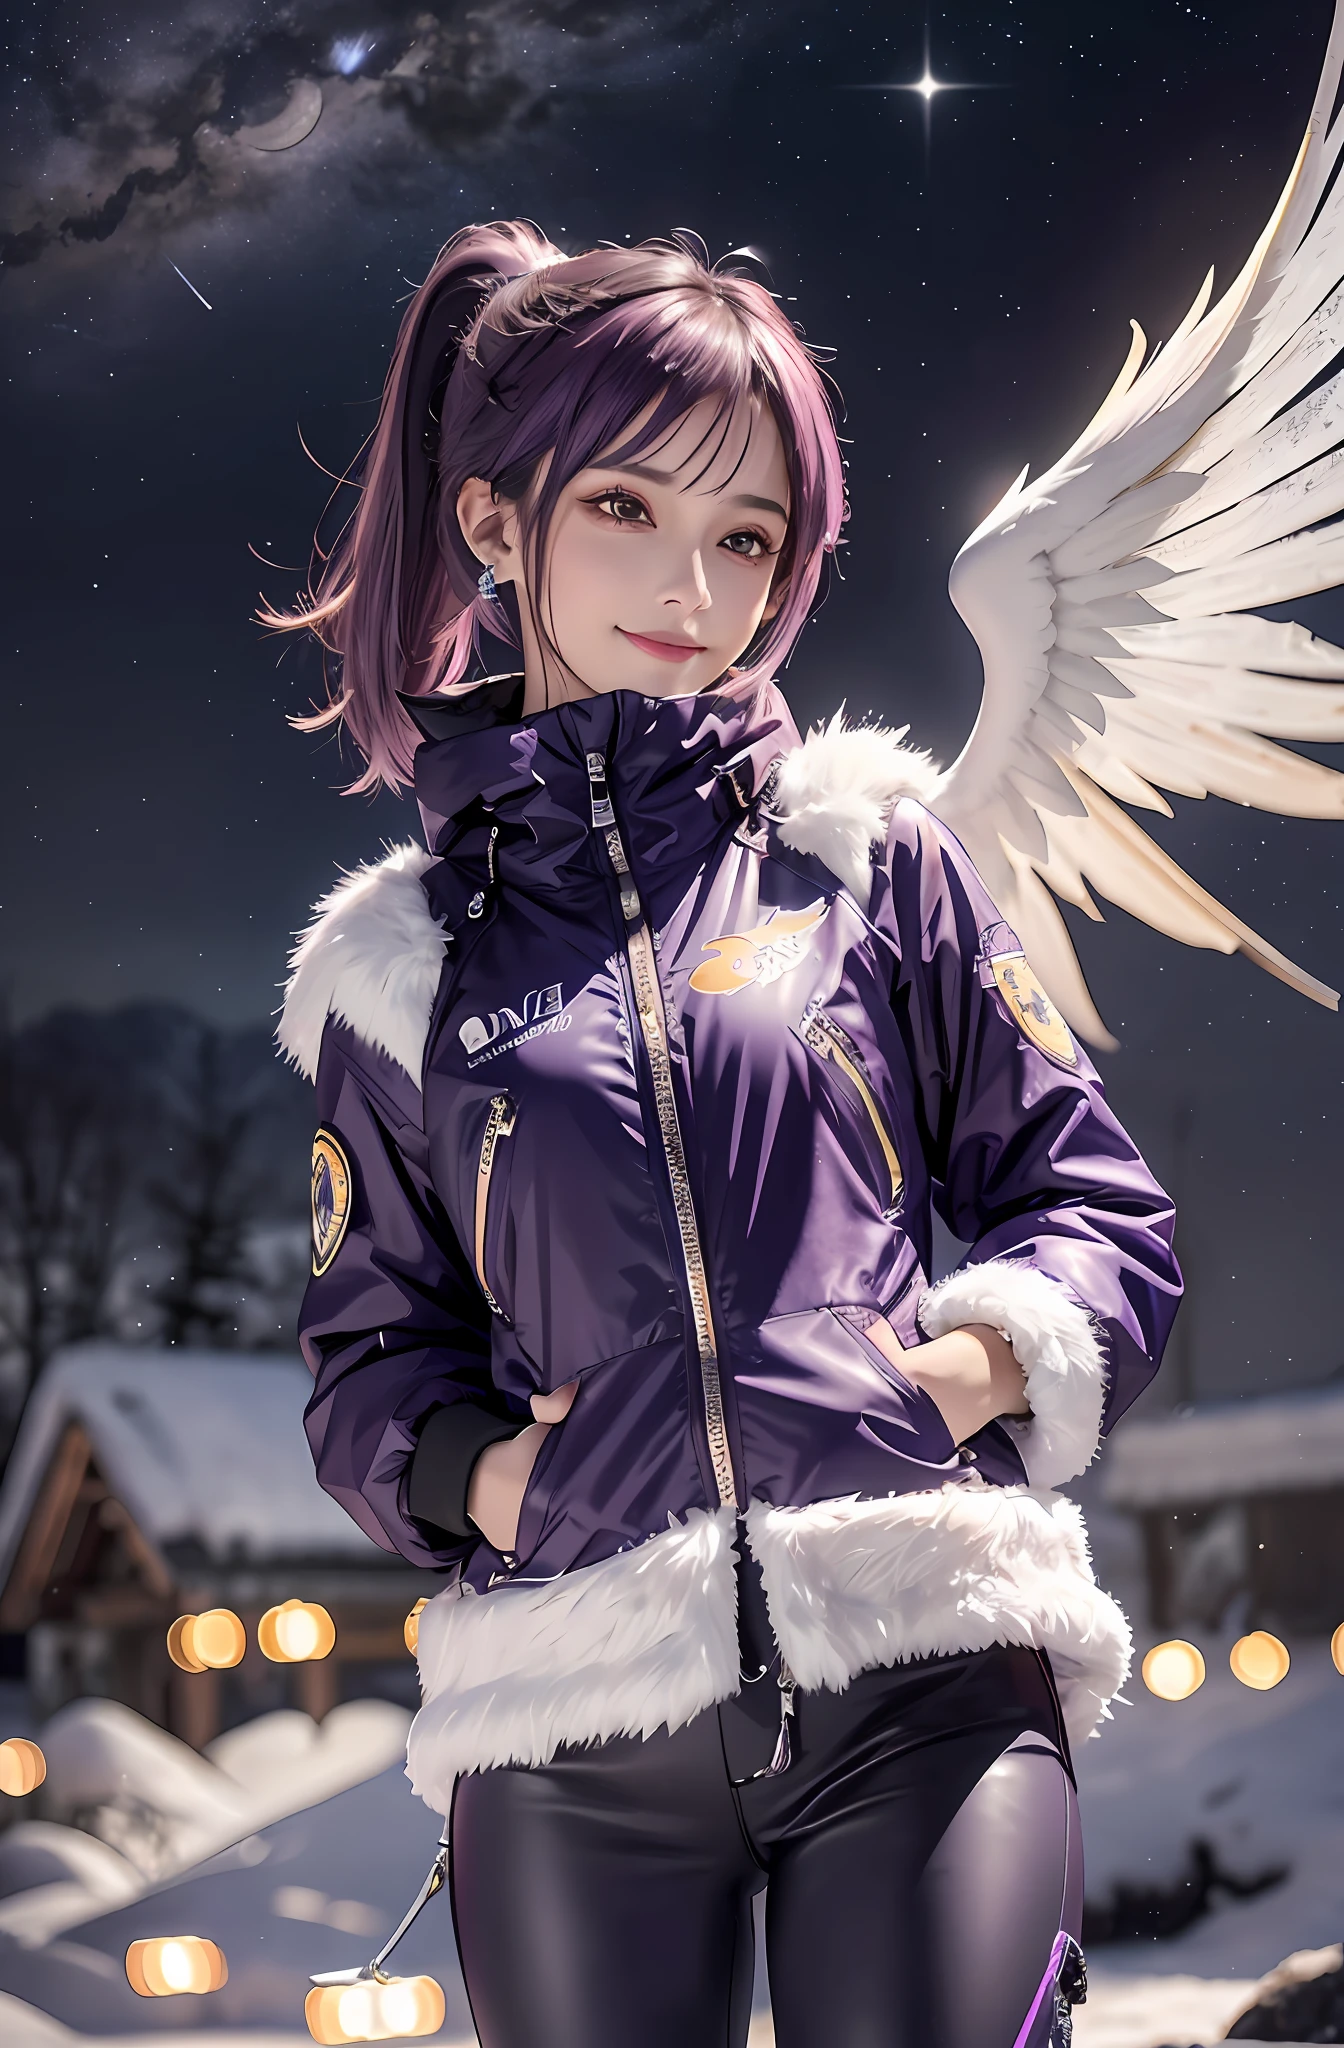 Ponytail. Short hair. Smile, purple hair. Earring. Divine wings on the back. Snow. Ski wear. Winter clothes. Meteor shower. Long pants. Muffler. Smile. Crescent moon. Shooting star. Starry sky. Earphone. Navel out. Wings grown on the back. Purple wings.